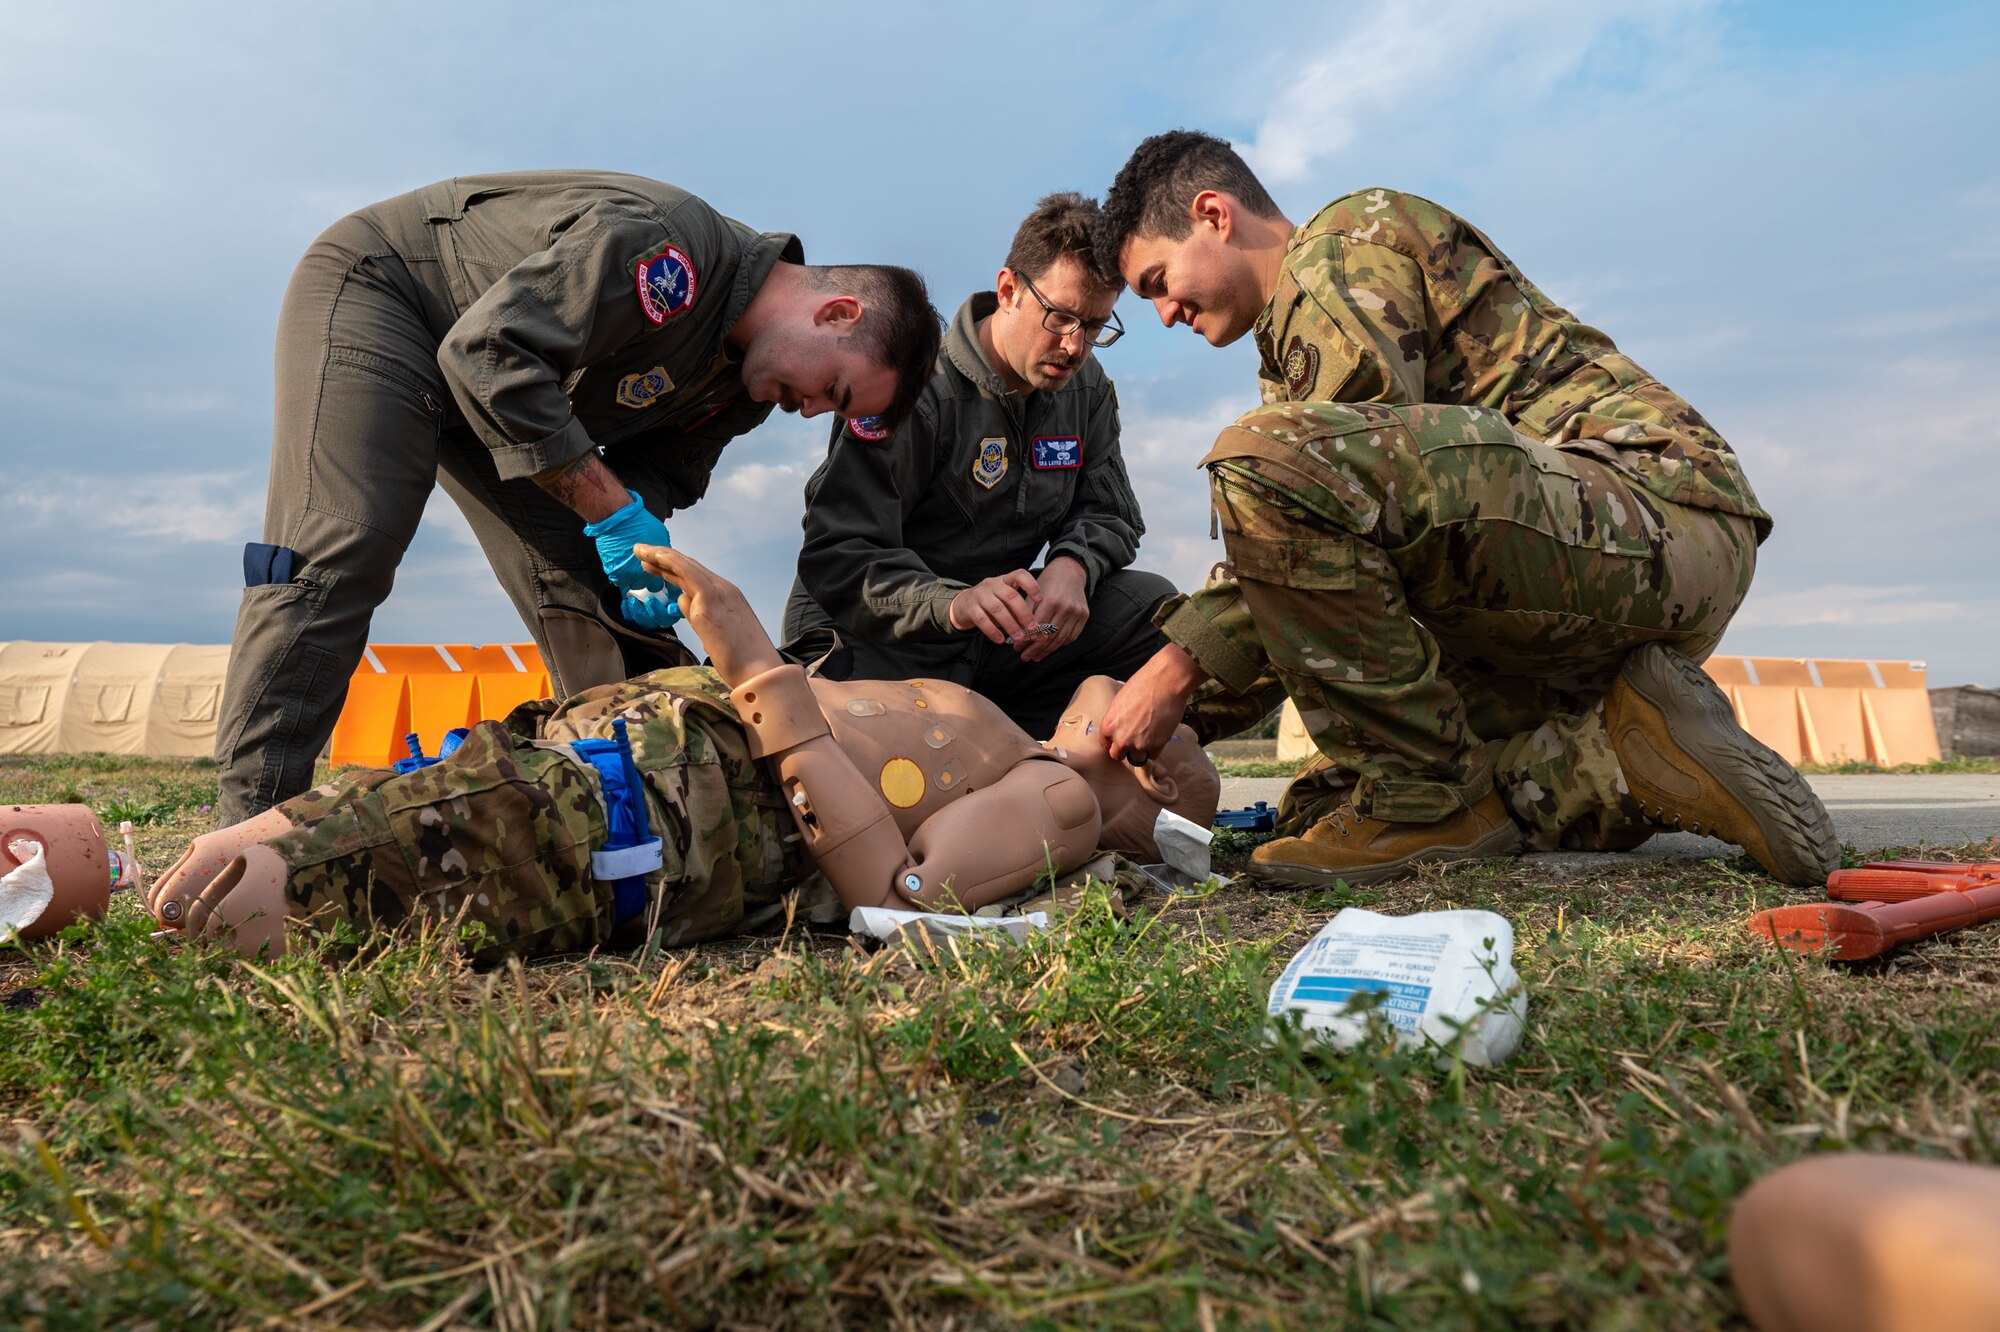 Senior Airman Jacob Ellis, left, Senior Airman Layrd Olliff, center, and Senior Airman Joshua Amos,  in-flight refueling specialists assigned to the 93rd Air Refueling Squadron, treat a simulated patient’s injuries during a “boom rodeo" hosted by the 92nd Operations Group at Fairchild Air Force Base, Washington, Sept. 20, 2023. During the rodeo, six air refueling squadrons competed in a forklift loading event, Tactical Combat Casualty Care and a water survival scenario. Scenarios like this enable Airmen to get hands-on training with tools to which they may not otherwise have access. These competitions also build camaraderie between units from different bases and provide friendly competition to motivate Airmen to perform their best. (U.S. Air Force photo by Airman 1st Class Morgan Dailey)